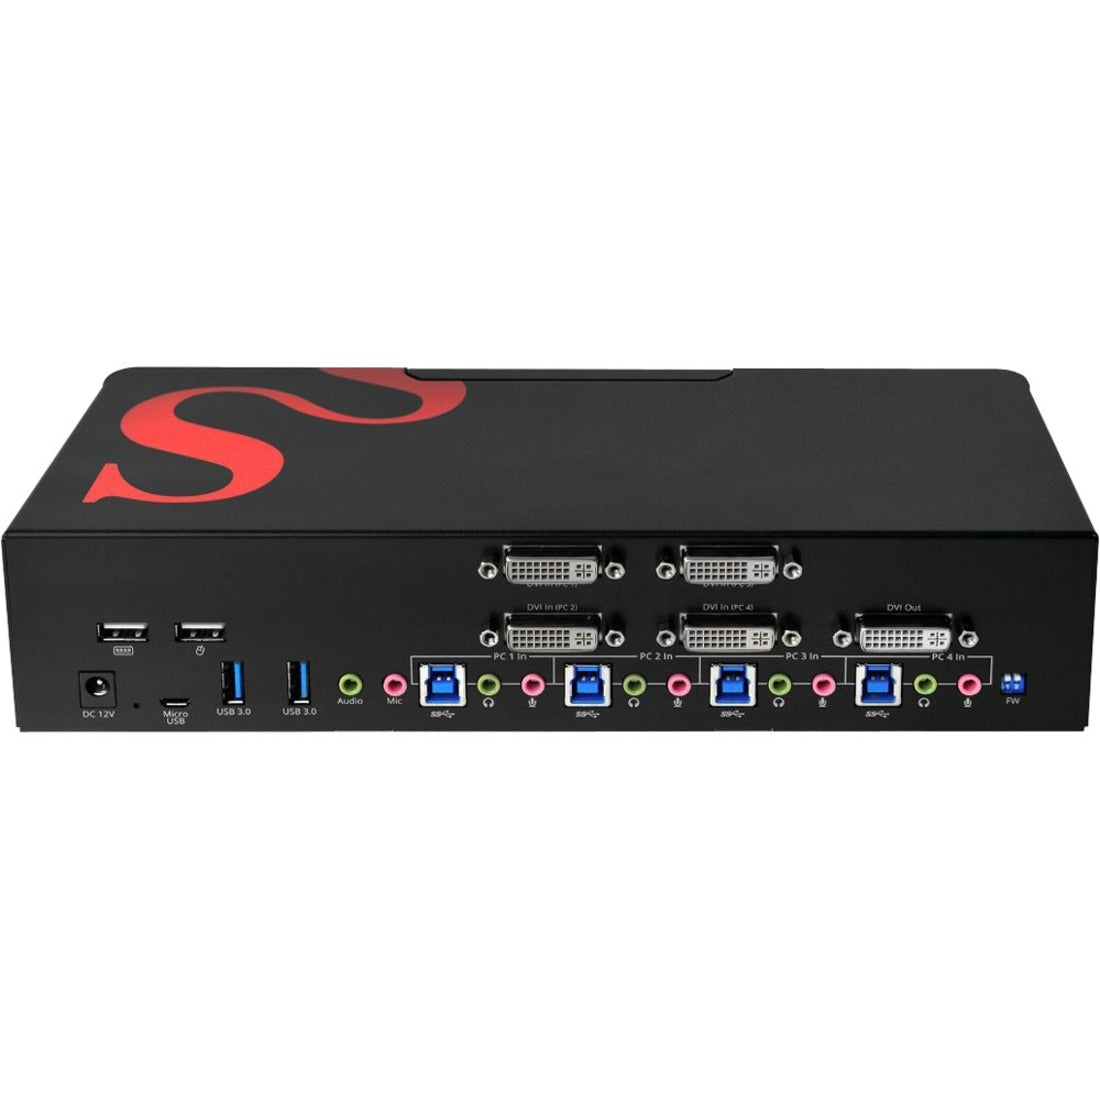 SIIG CE-DV0211-S1 4-Port DVI Dual-Link Smart Console KVM Switch with USB 3.0 and Multimedia Ports, Maximum Video Resolution 3840 x 2400, 3 Year Warranty